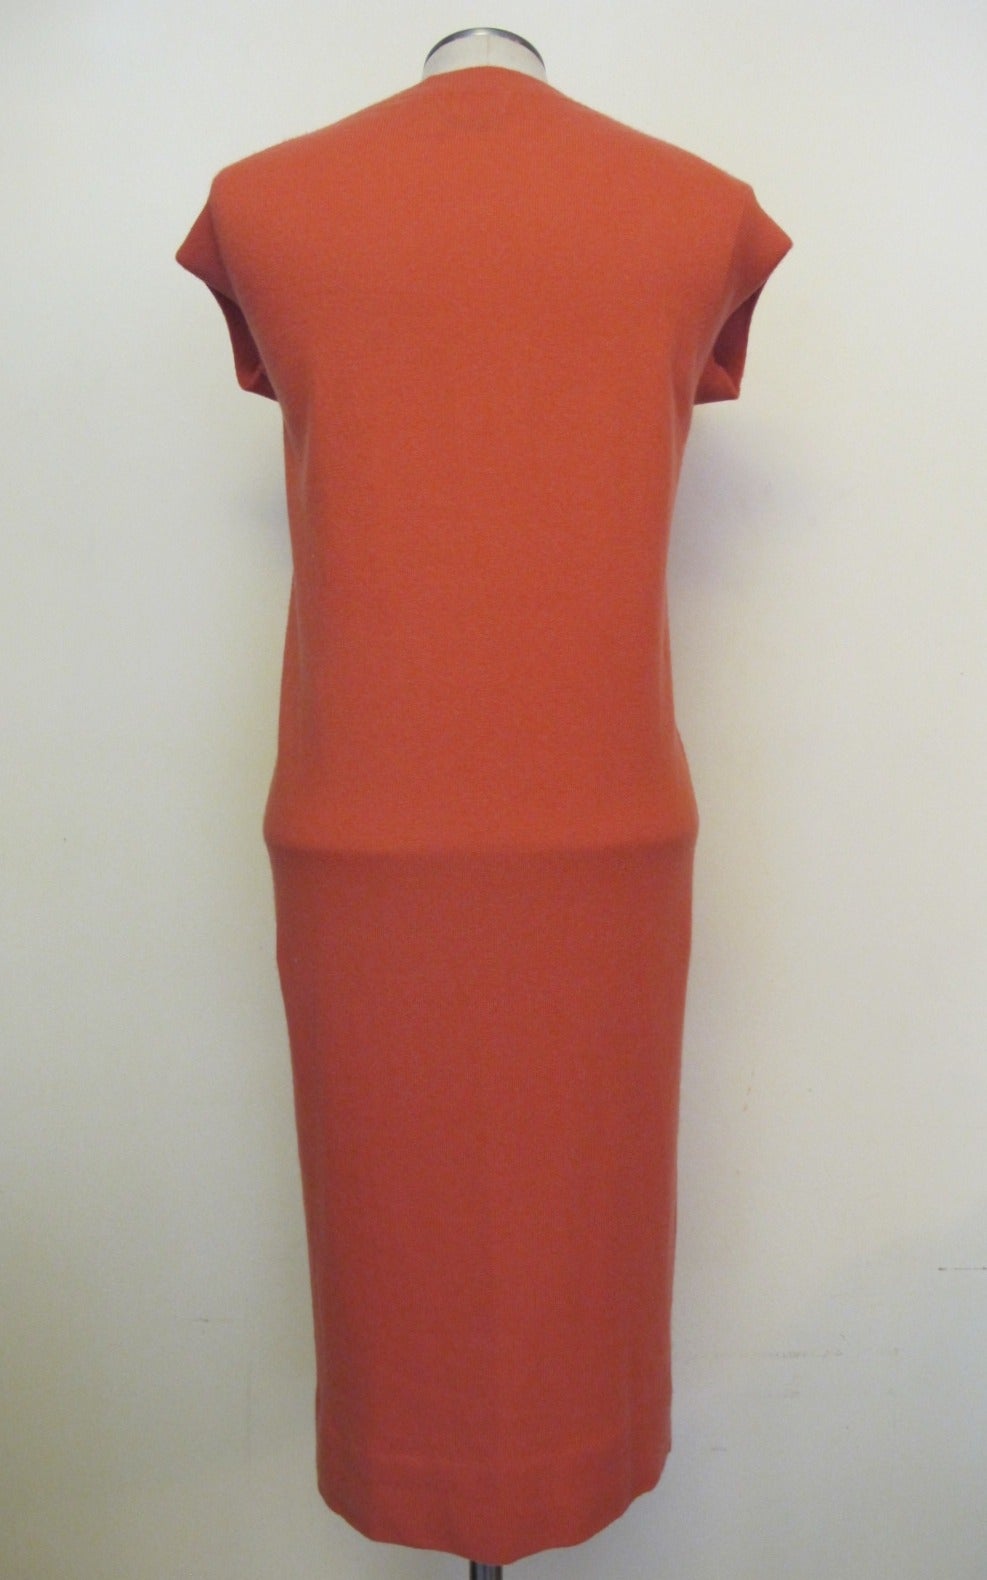 1960's Bonnie Cashin Cashmere Salmon Dress Made for Saks Fifth Avenue In Excellent Condition For Sale In San Francisco, CA